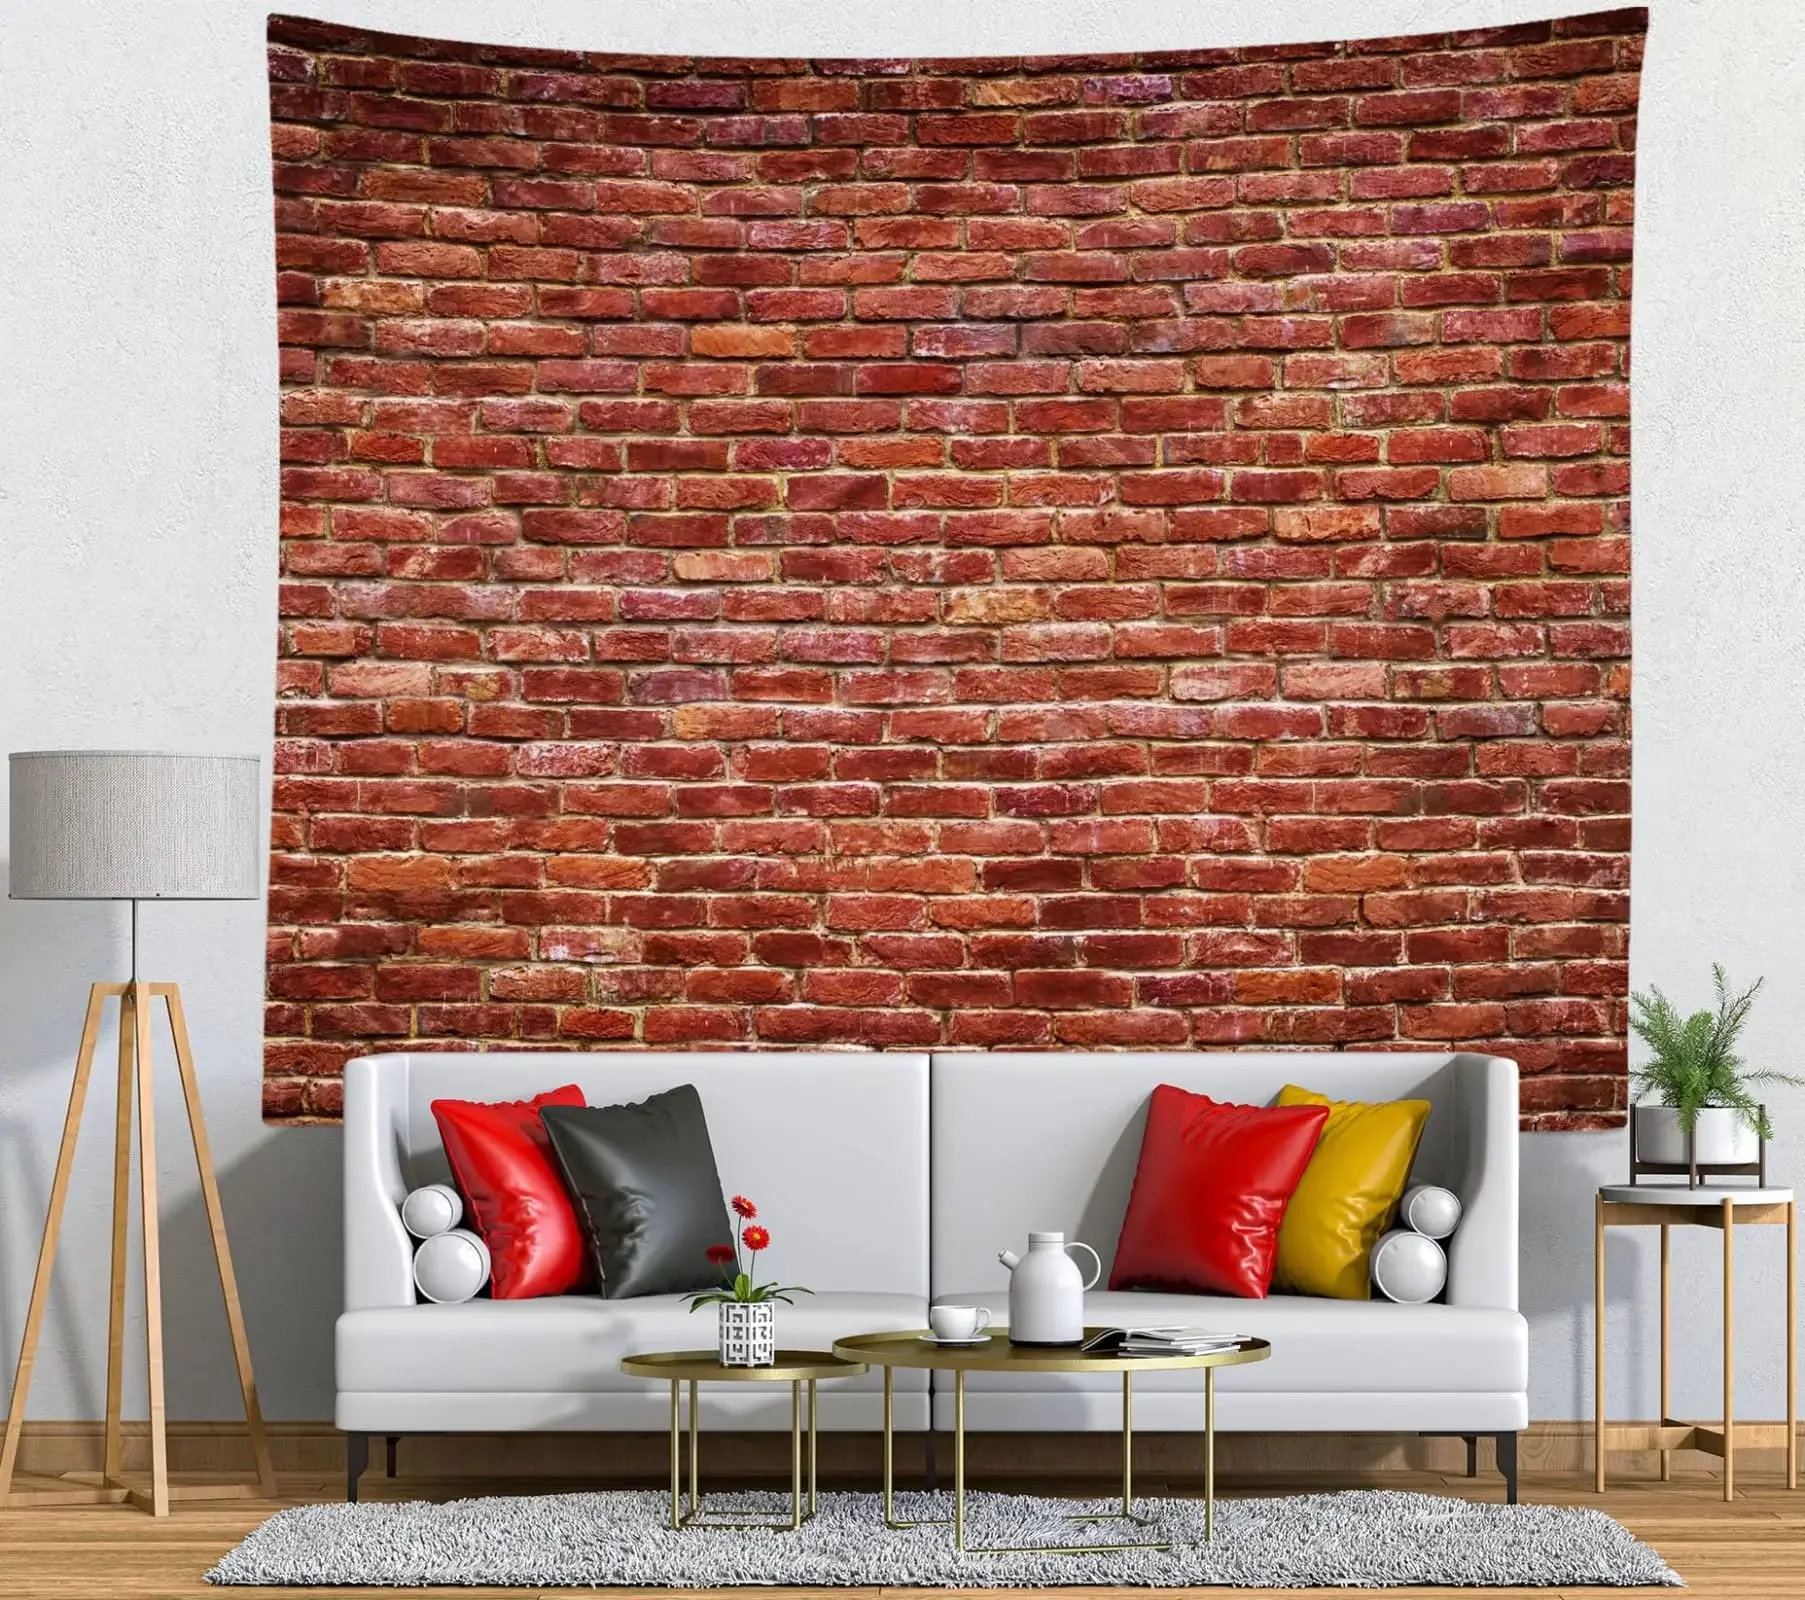 

Brick Wall Tapestry Retro Red Brick Wall Tapestry for Kids Adults Bedroom Living Room Dorm Home Wall Hanging Aesthetic Decor